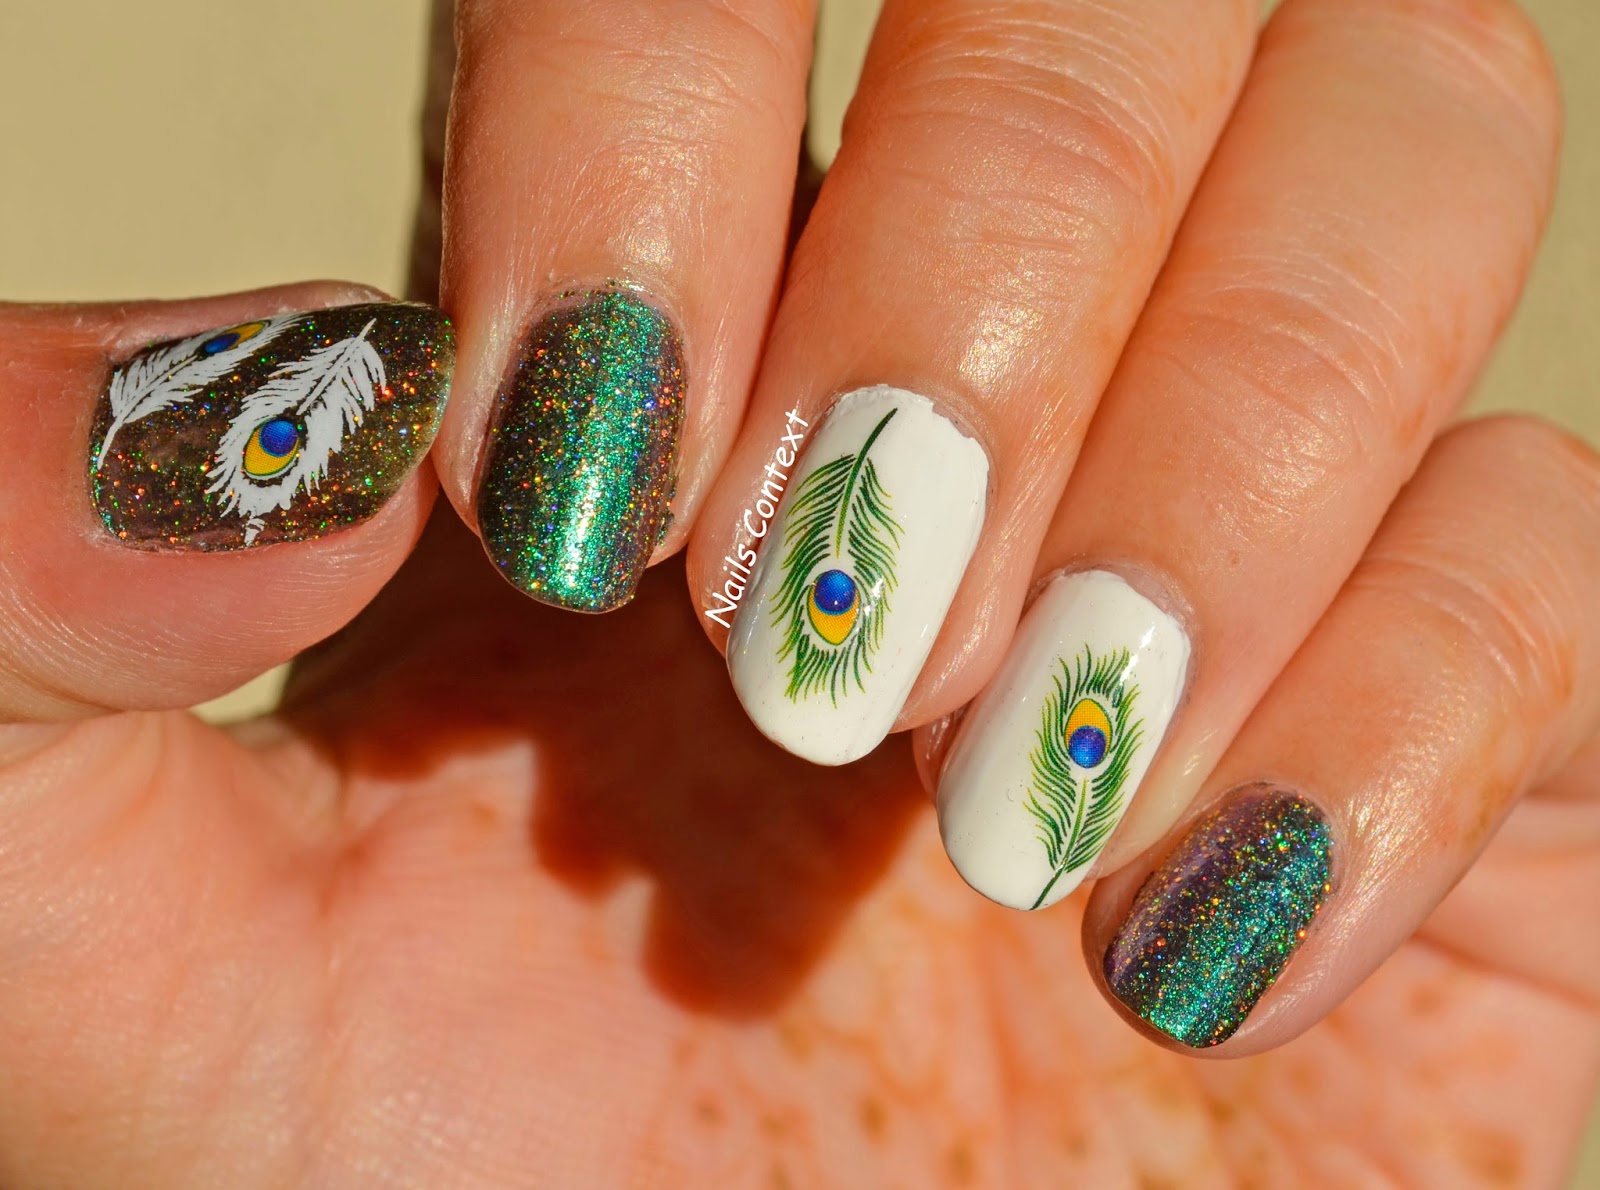 2. "DIY Peacock Feather Nail Art" - wide 4